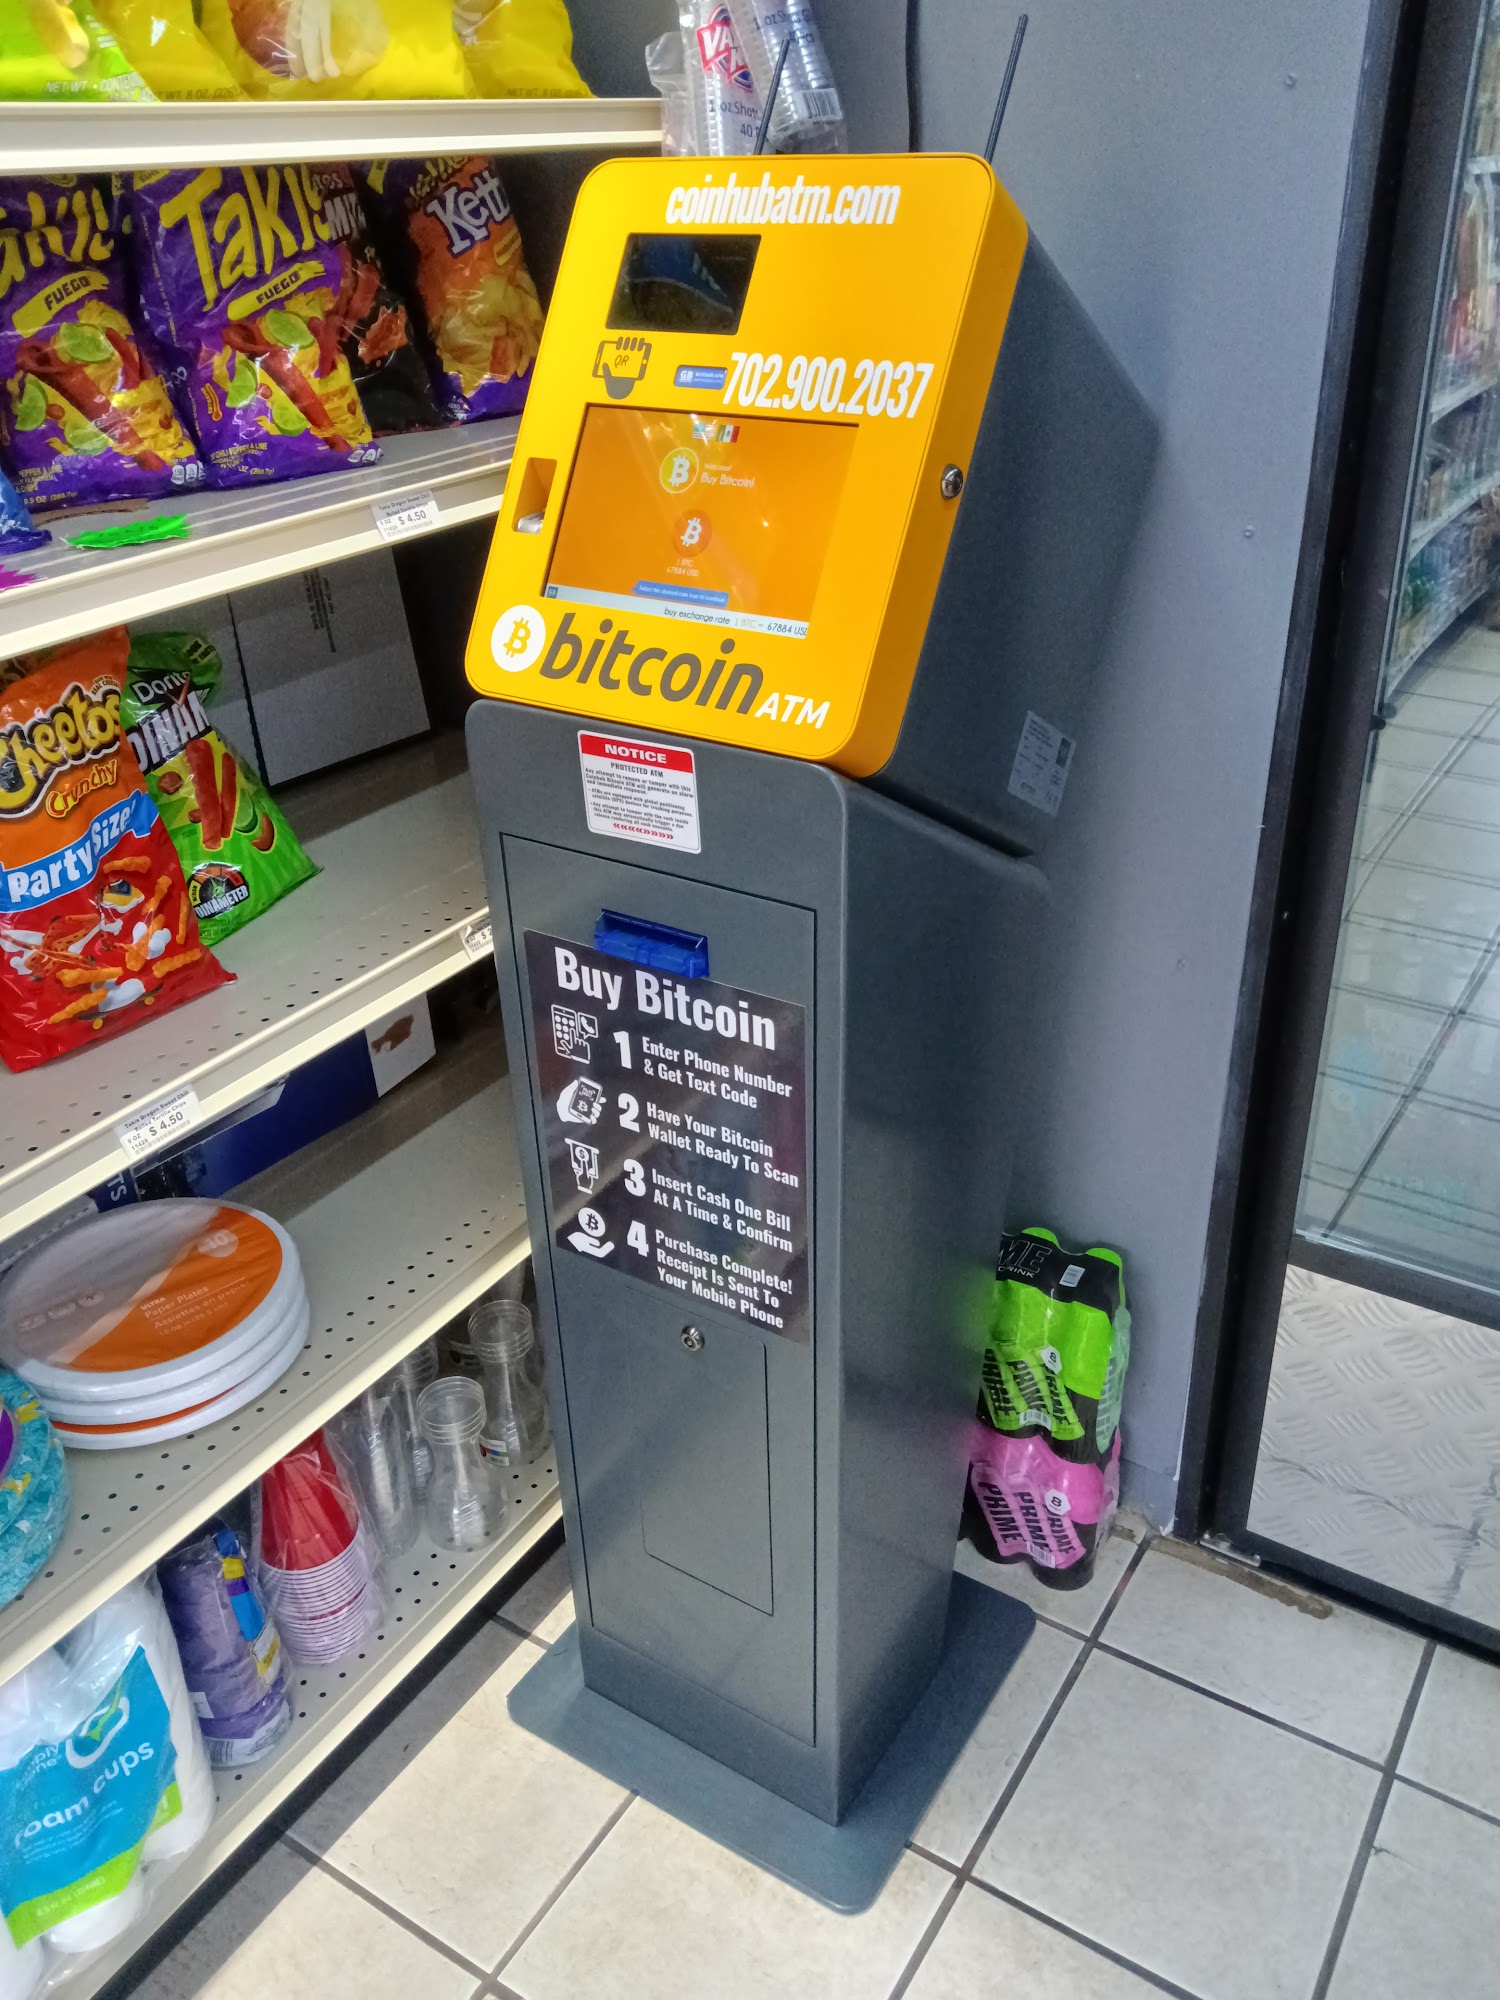 Bitcoin ATM Bloomingdale - Coinhub